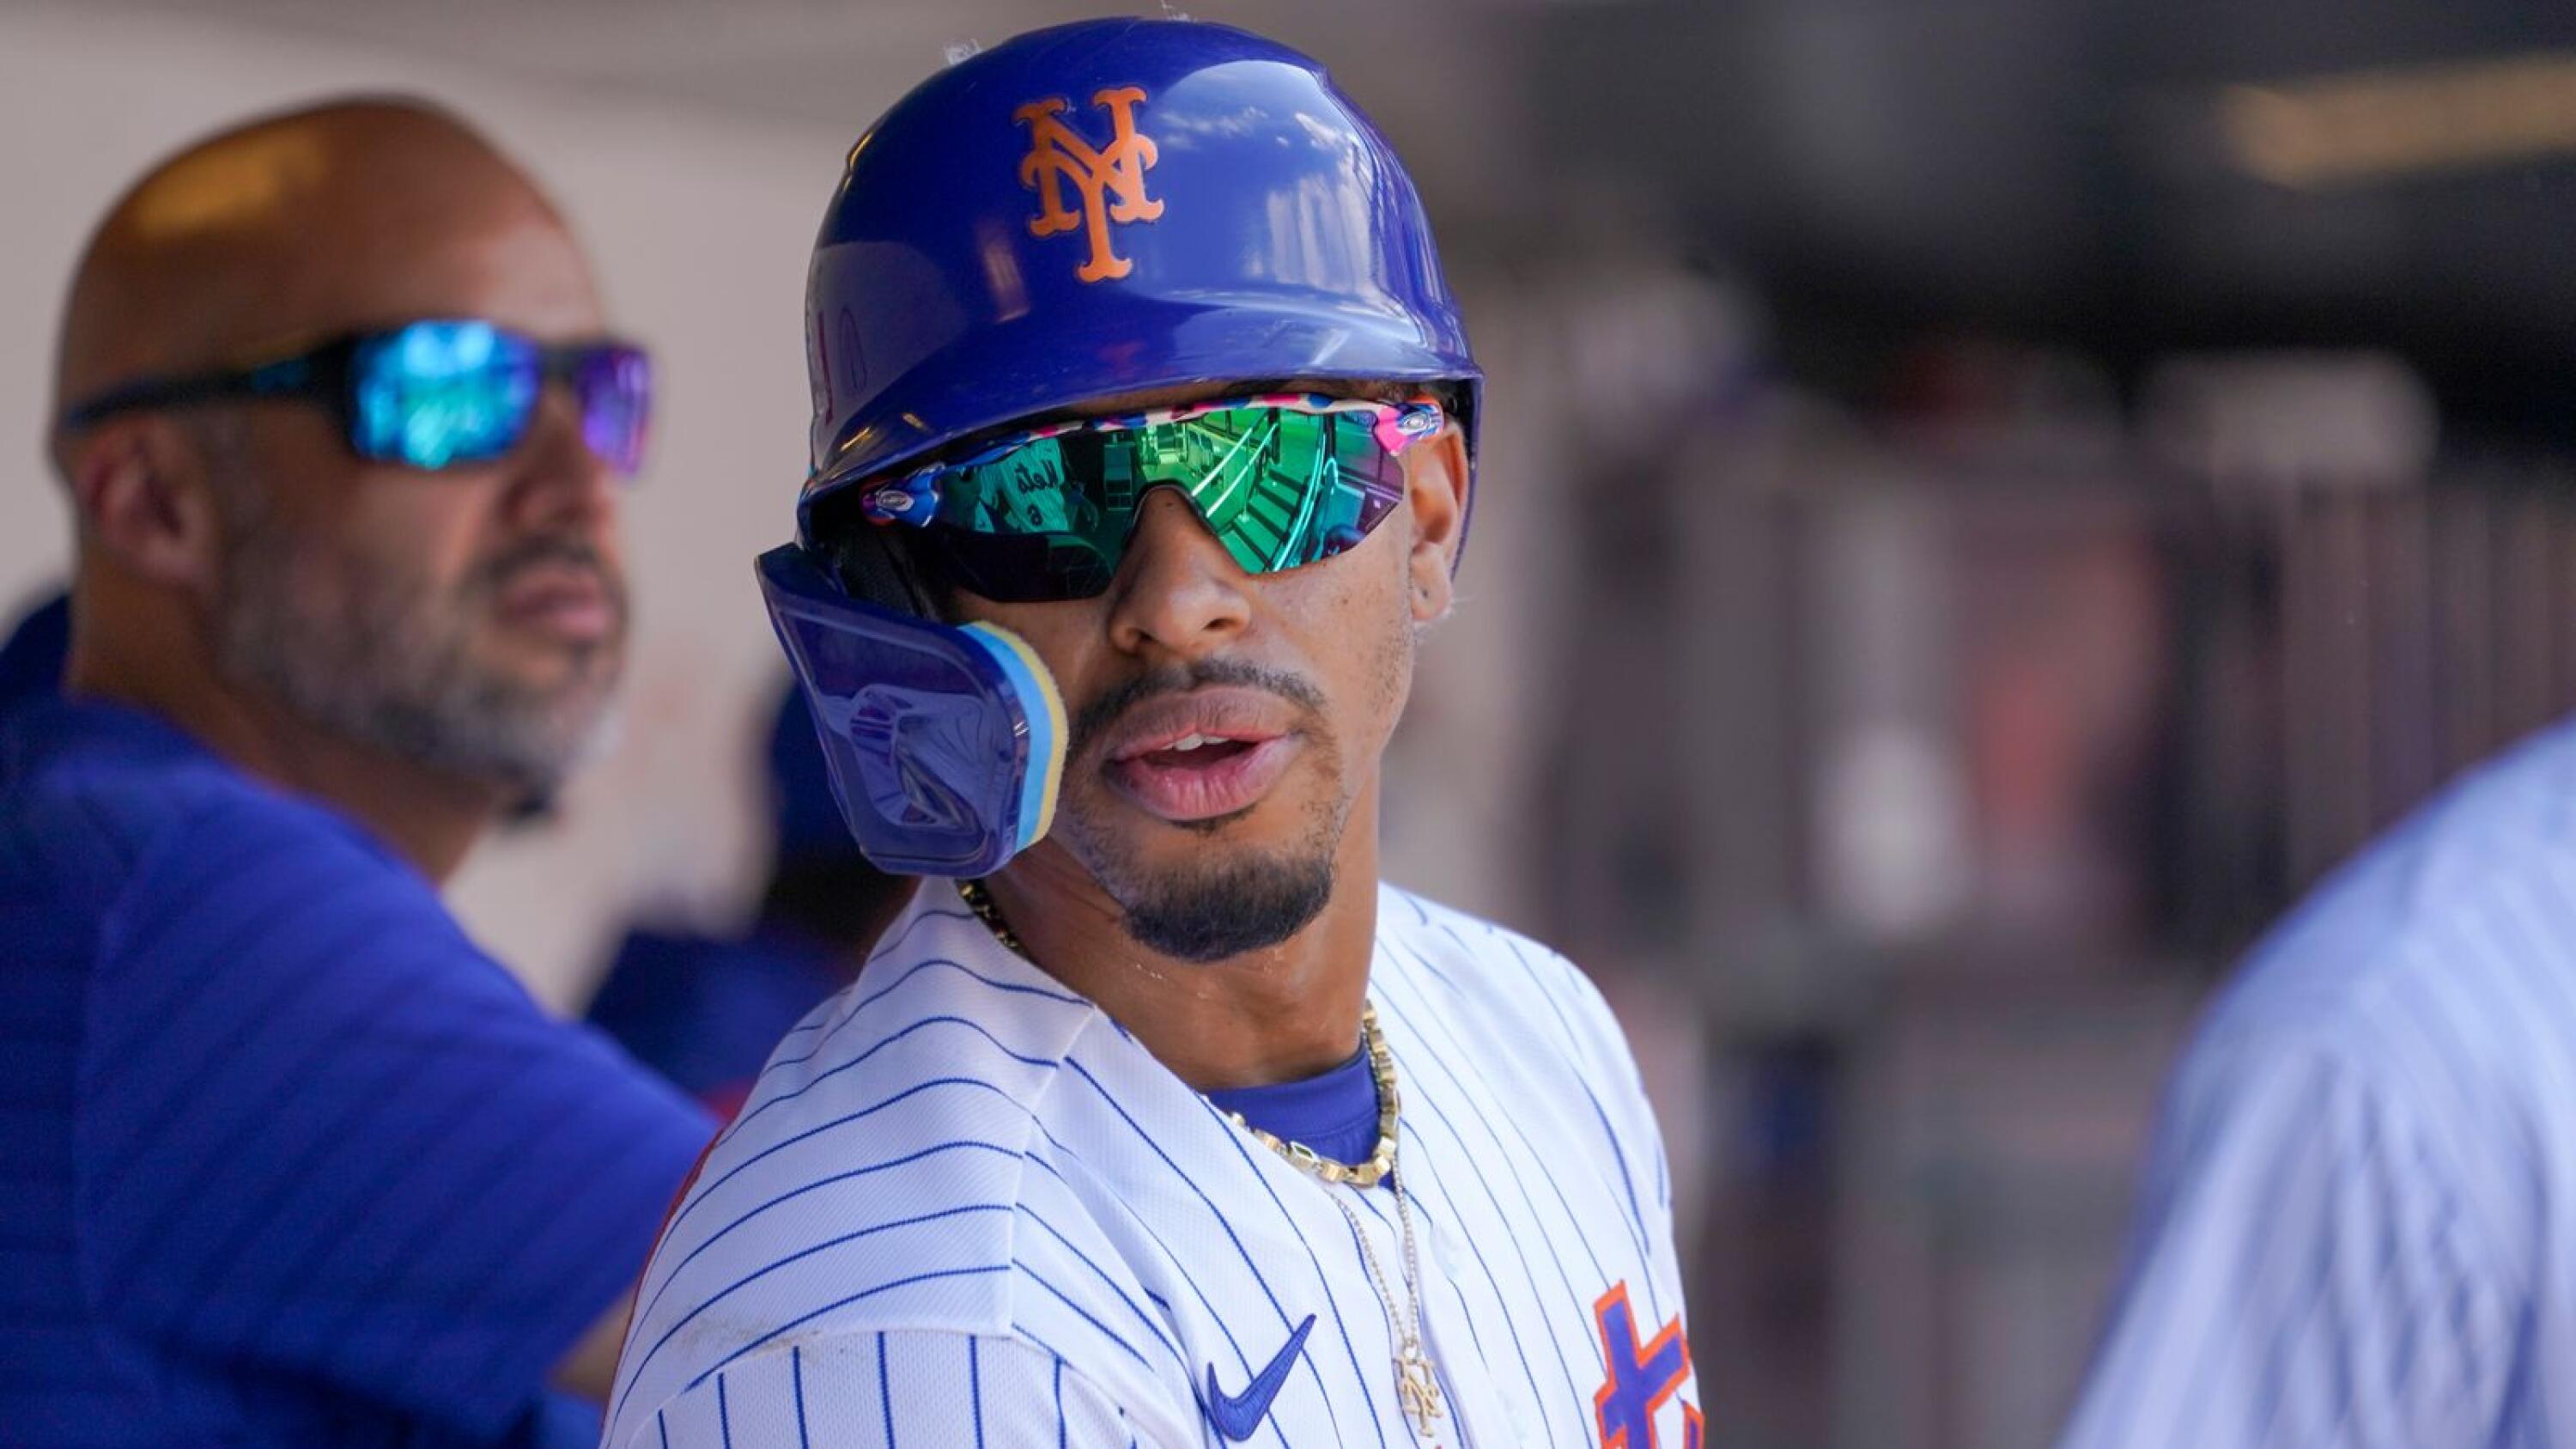 Mets: Francisco Lindor Joins Exclusive Club After Hat Trick of